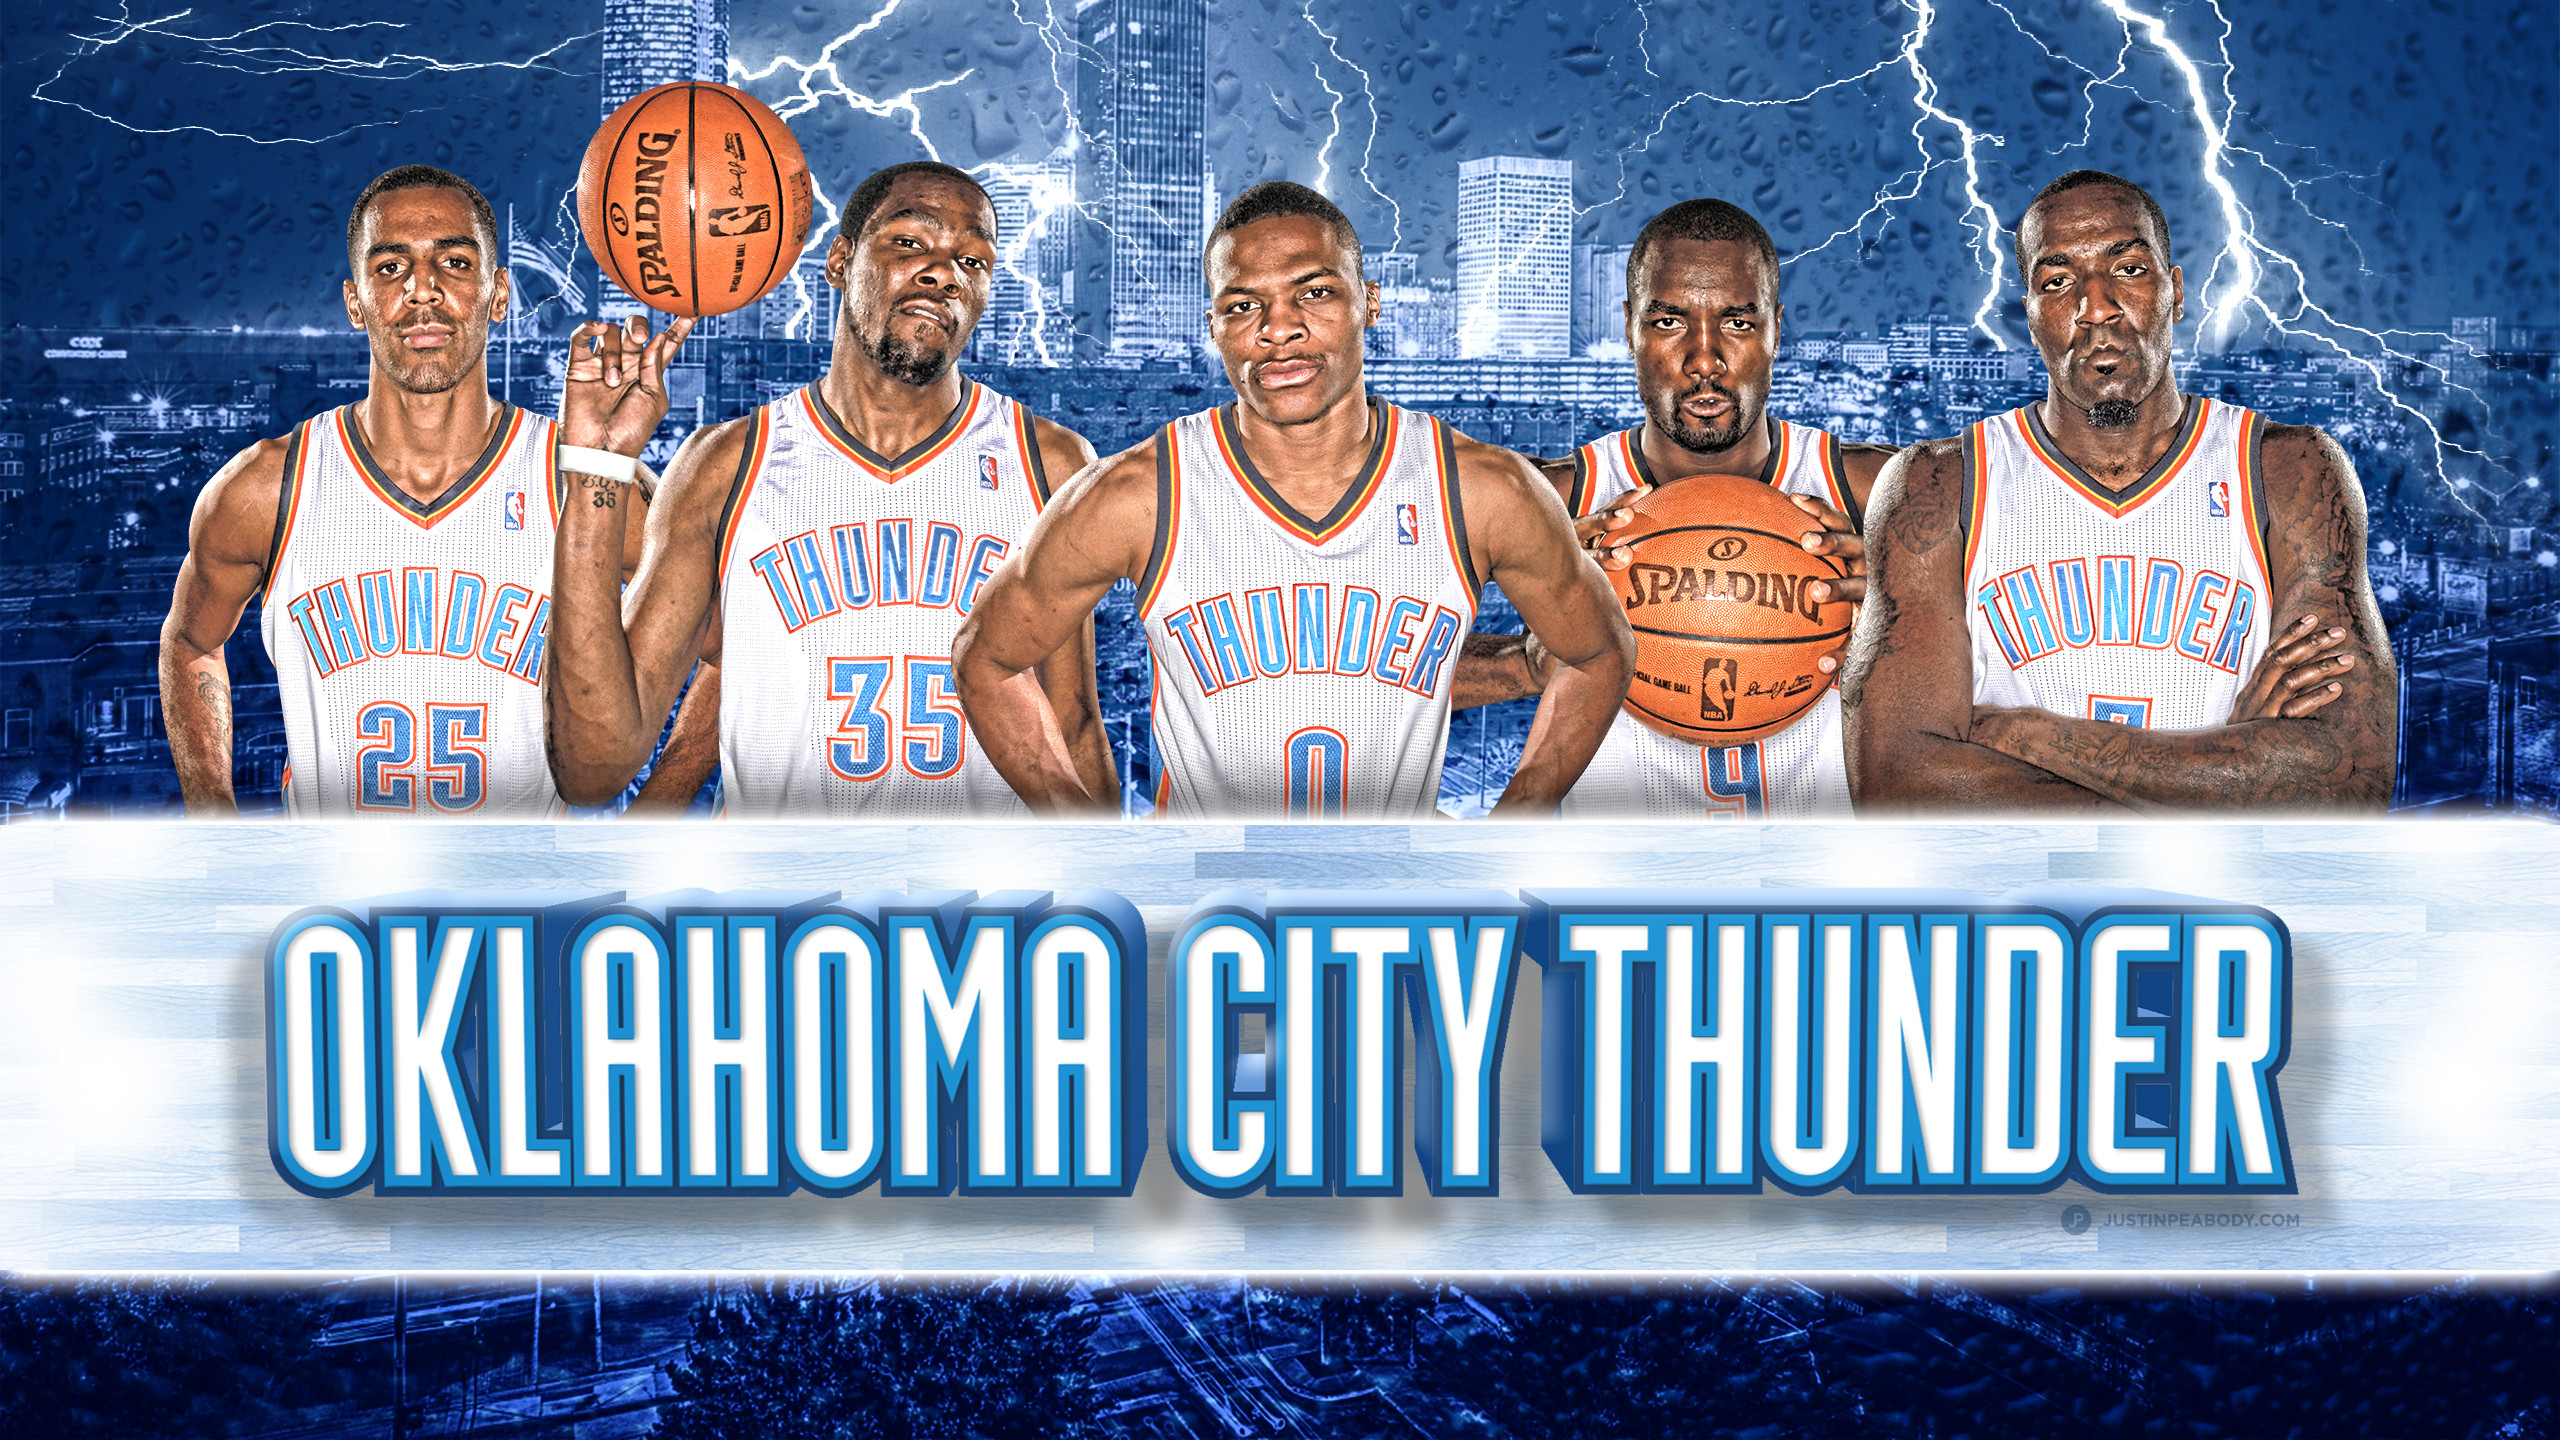 Free download Thread 2014 Thunder Wallpaper [2560x1440] for your